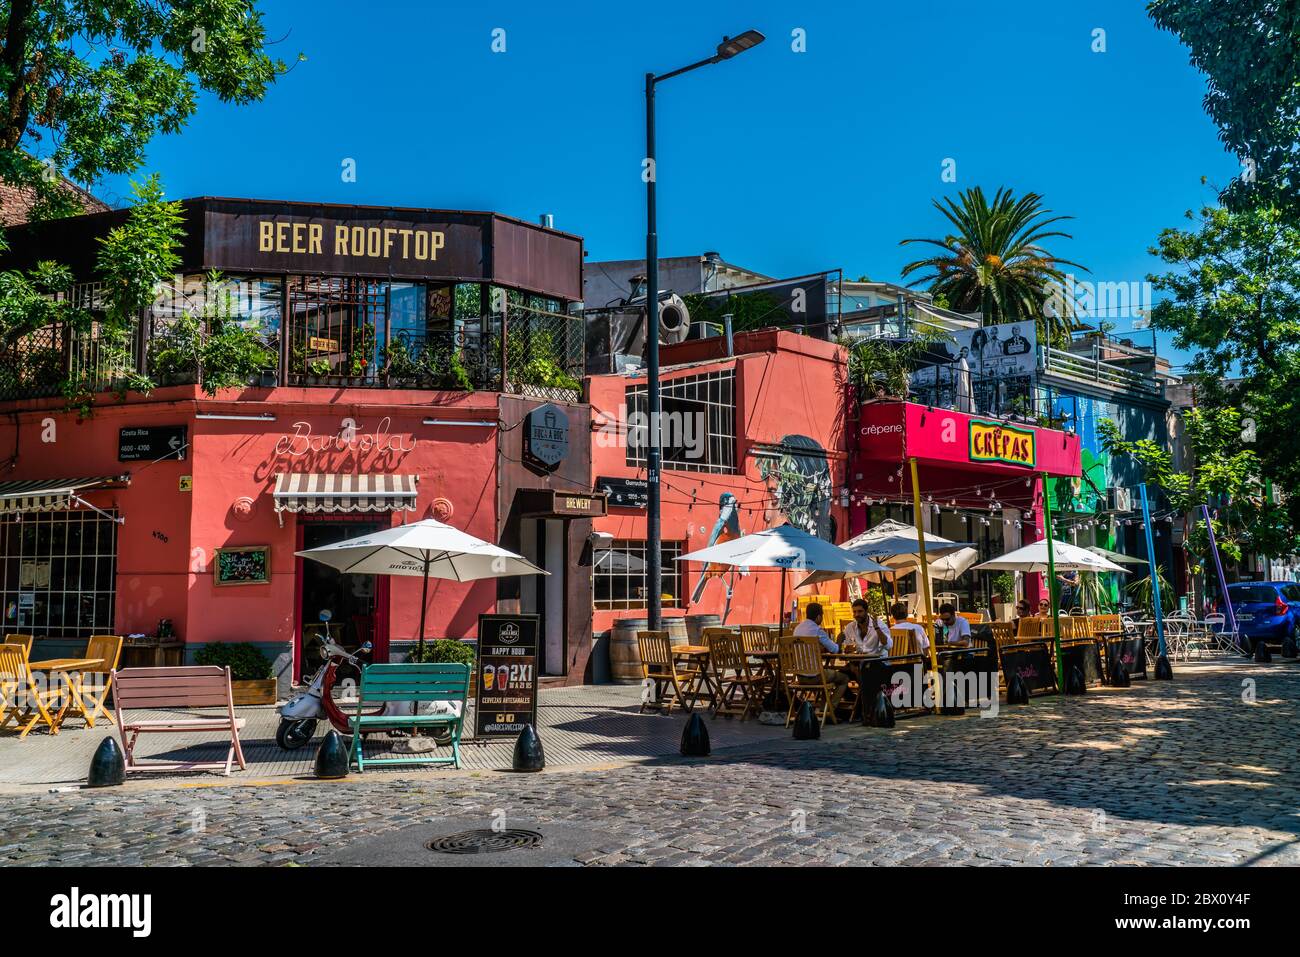 Tourists anjoying a drink on a terrace at a restaurant on a streetcorner of Recoleta, Buenos Aires, Argentina - January 23th 2019 Stock Photo